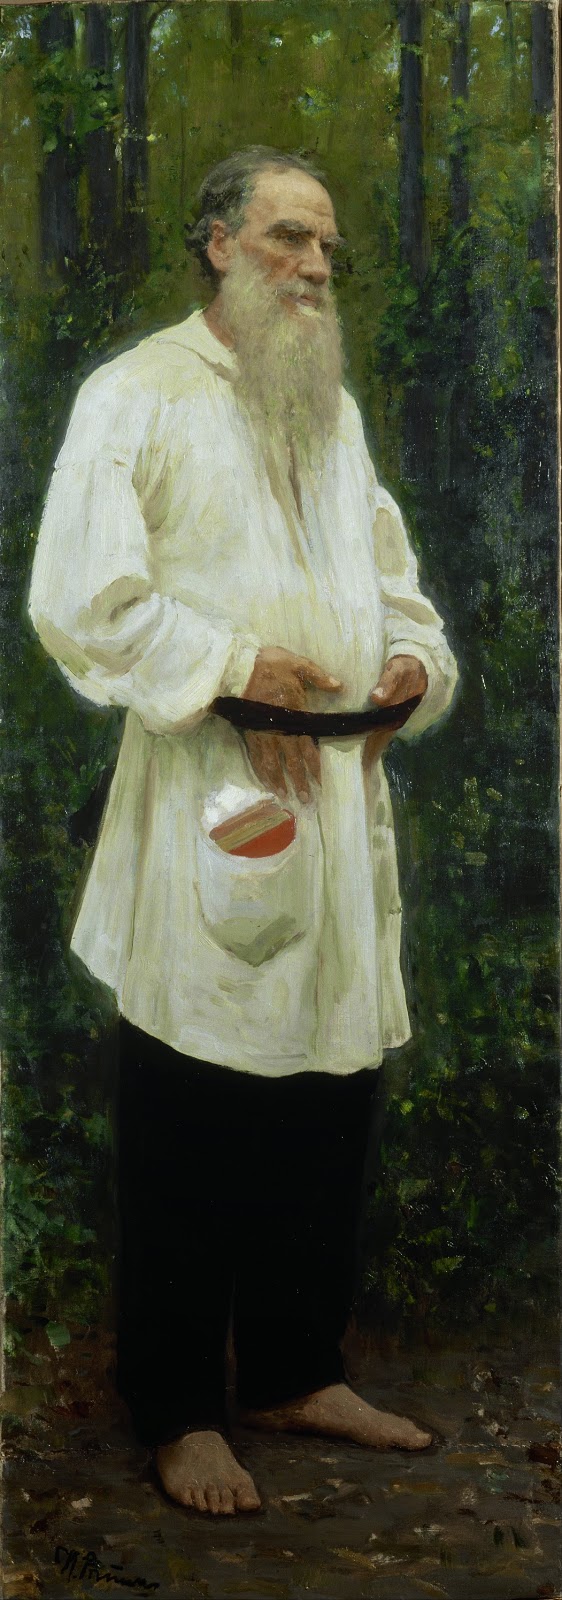 Russian author Leo Tolstoy in traditional peasant clothing